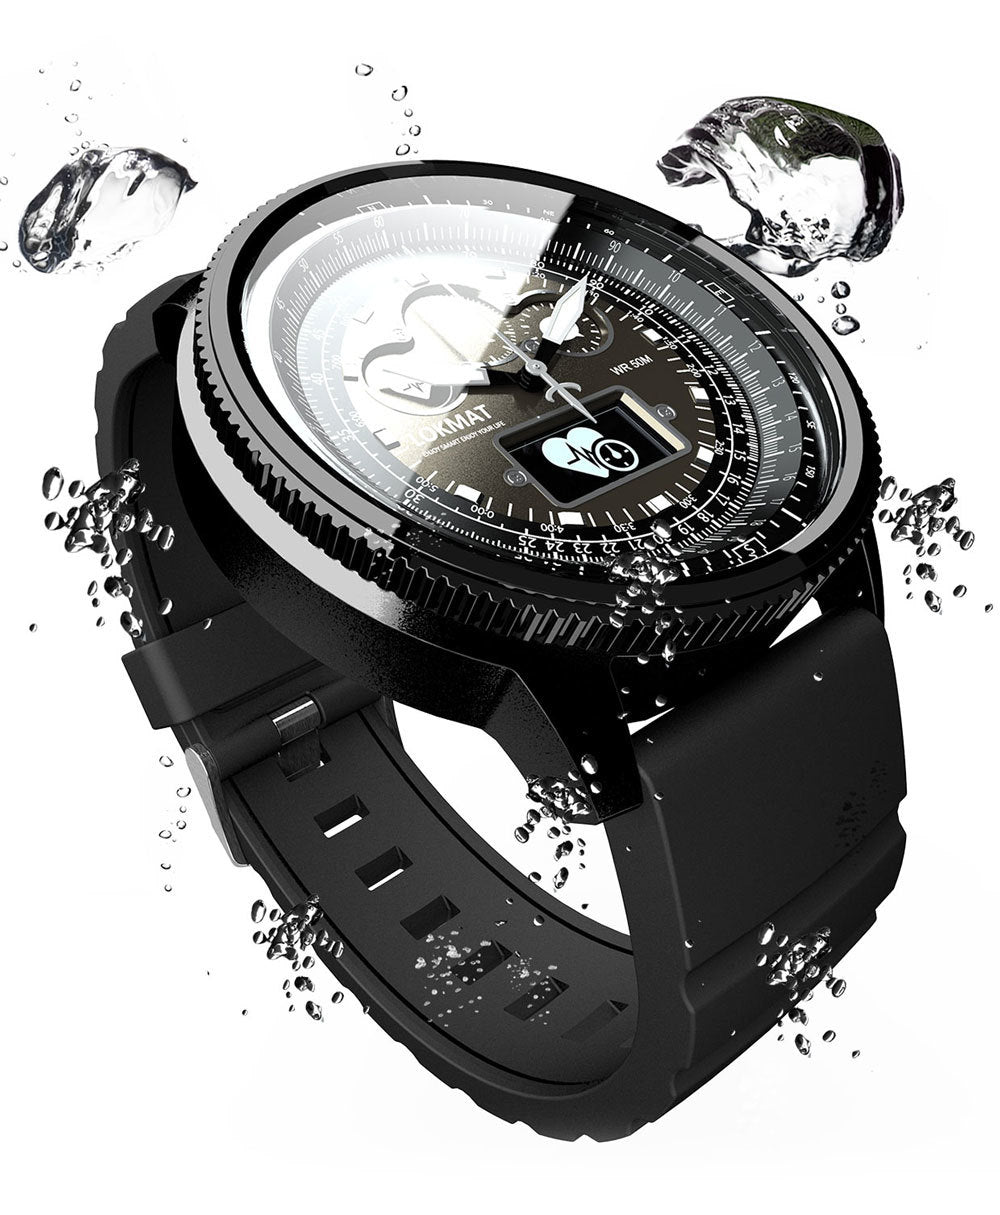 Tactical Smart Watch V11 Silver